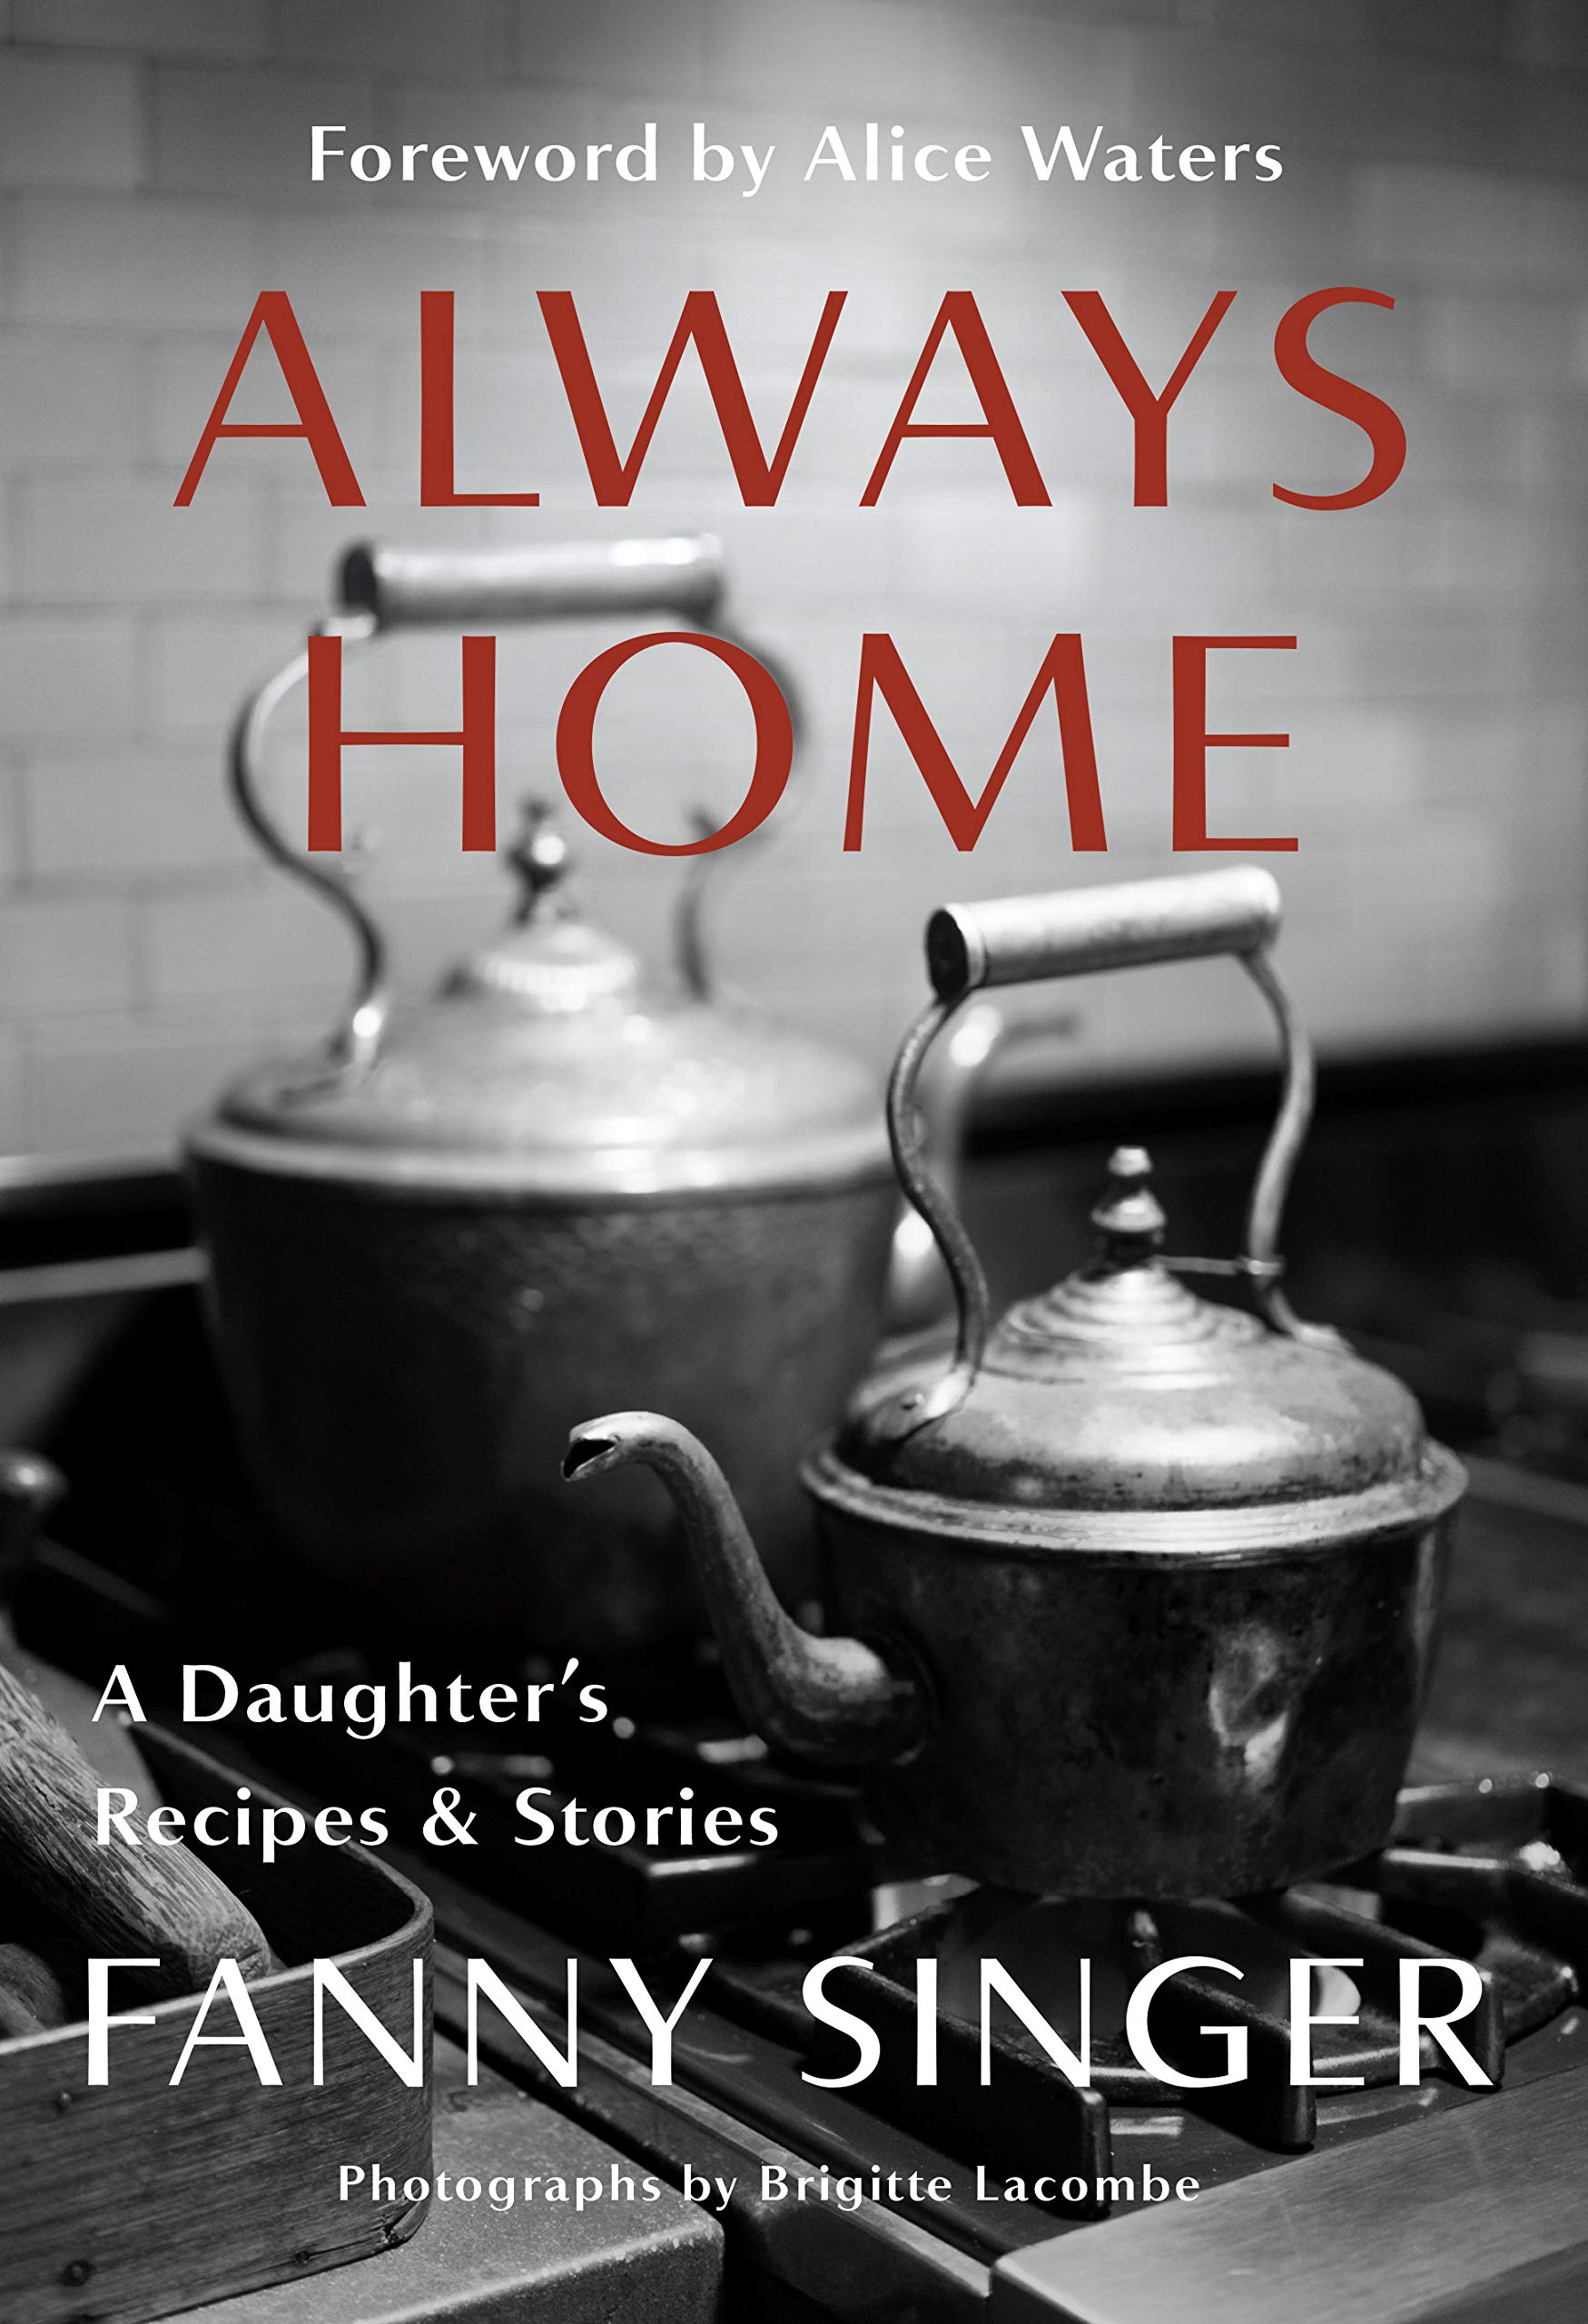 Always Home: A Daughter’s Recipes and Stories (Fanny Singer) *Signed*